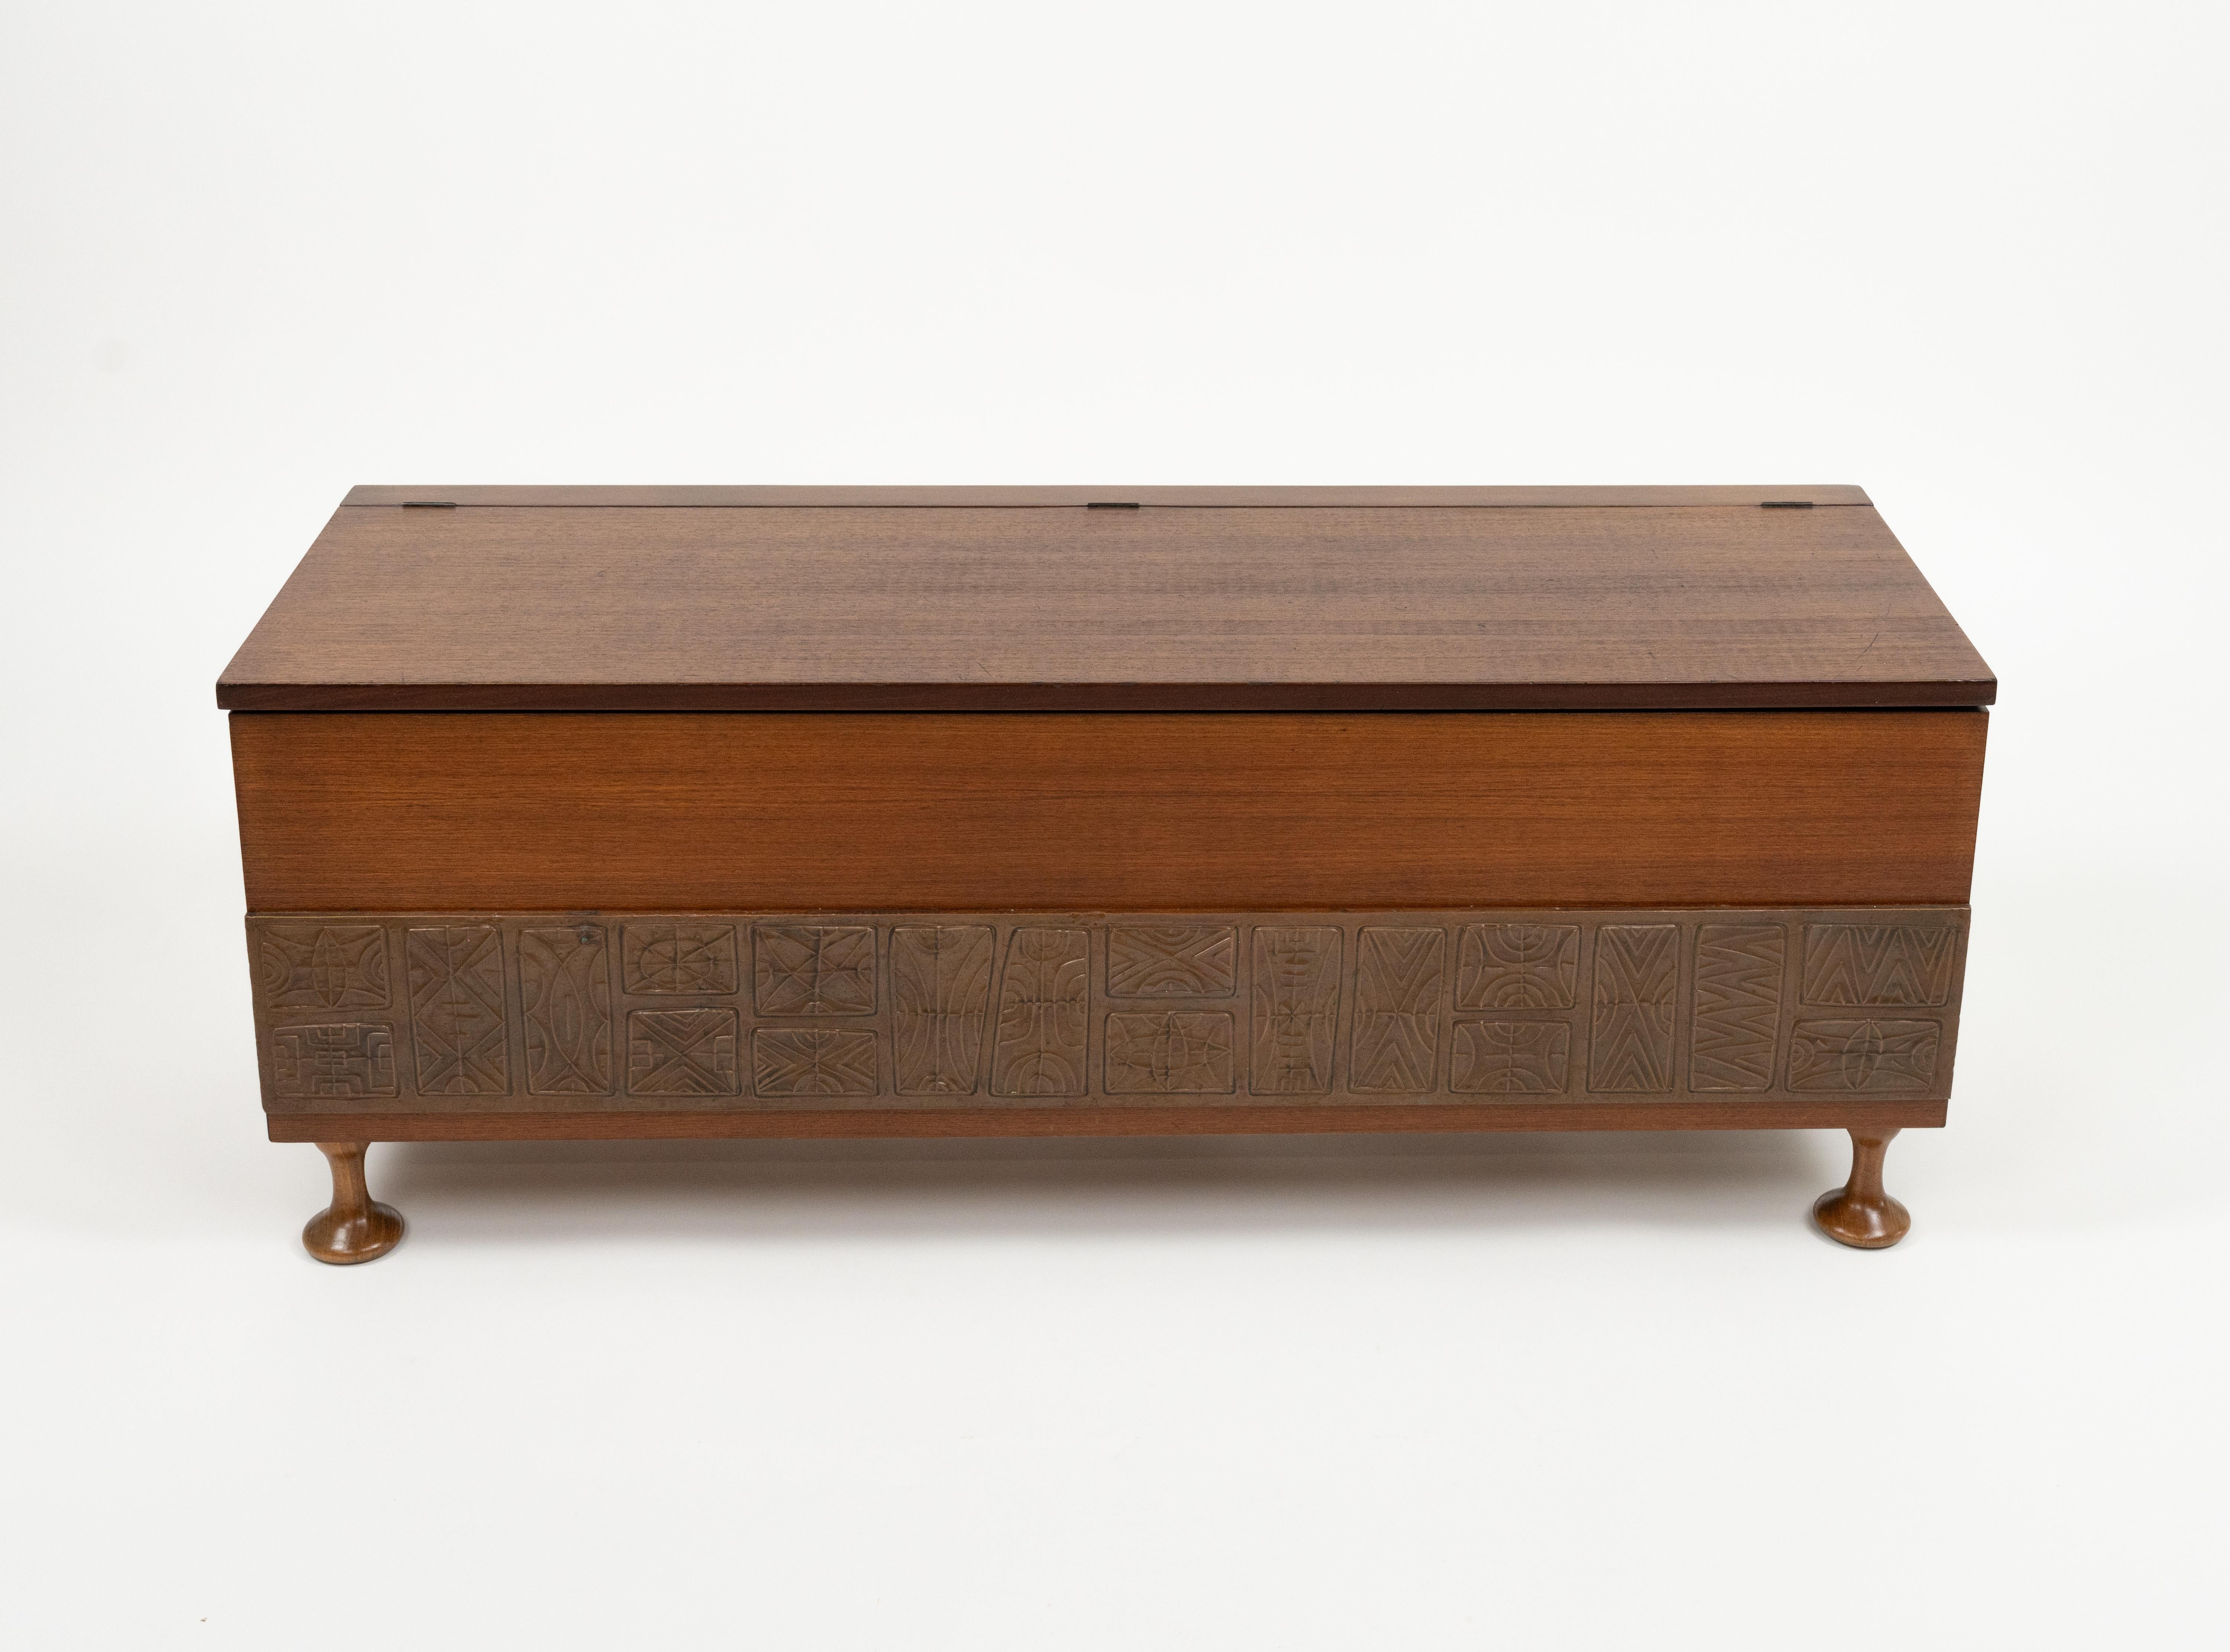 Midcentury amazing rectangular chest in wood and  embossed copper decoration on the lower part by Santambrogio & De Berti.   

Made in Italy in the 1960s.   

